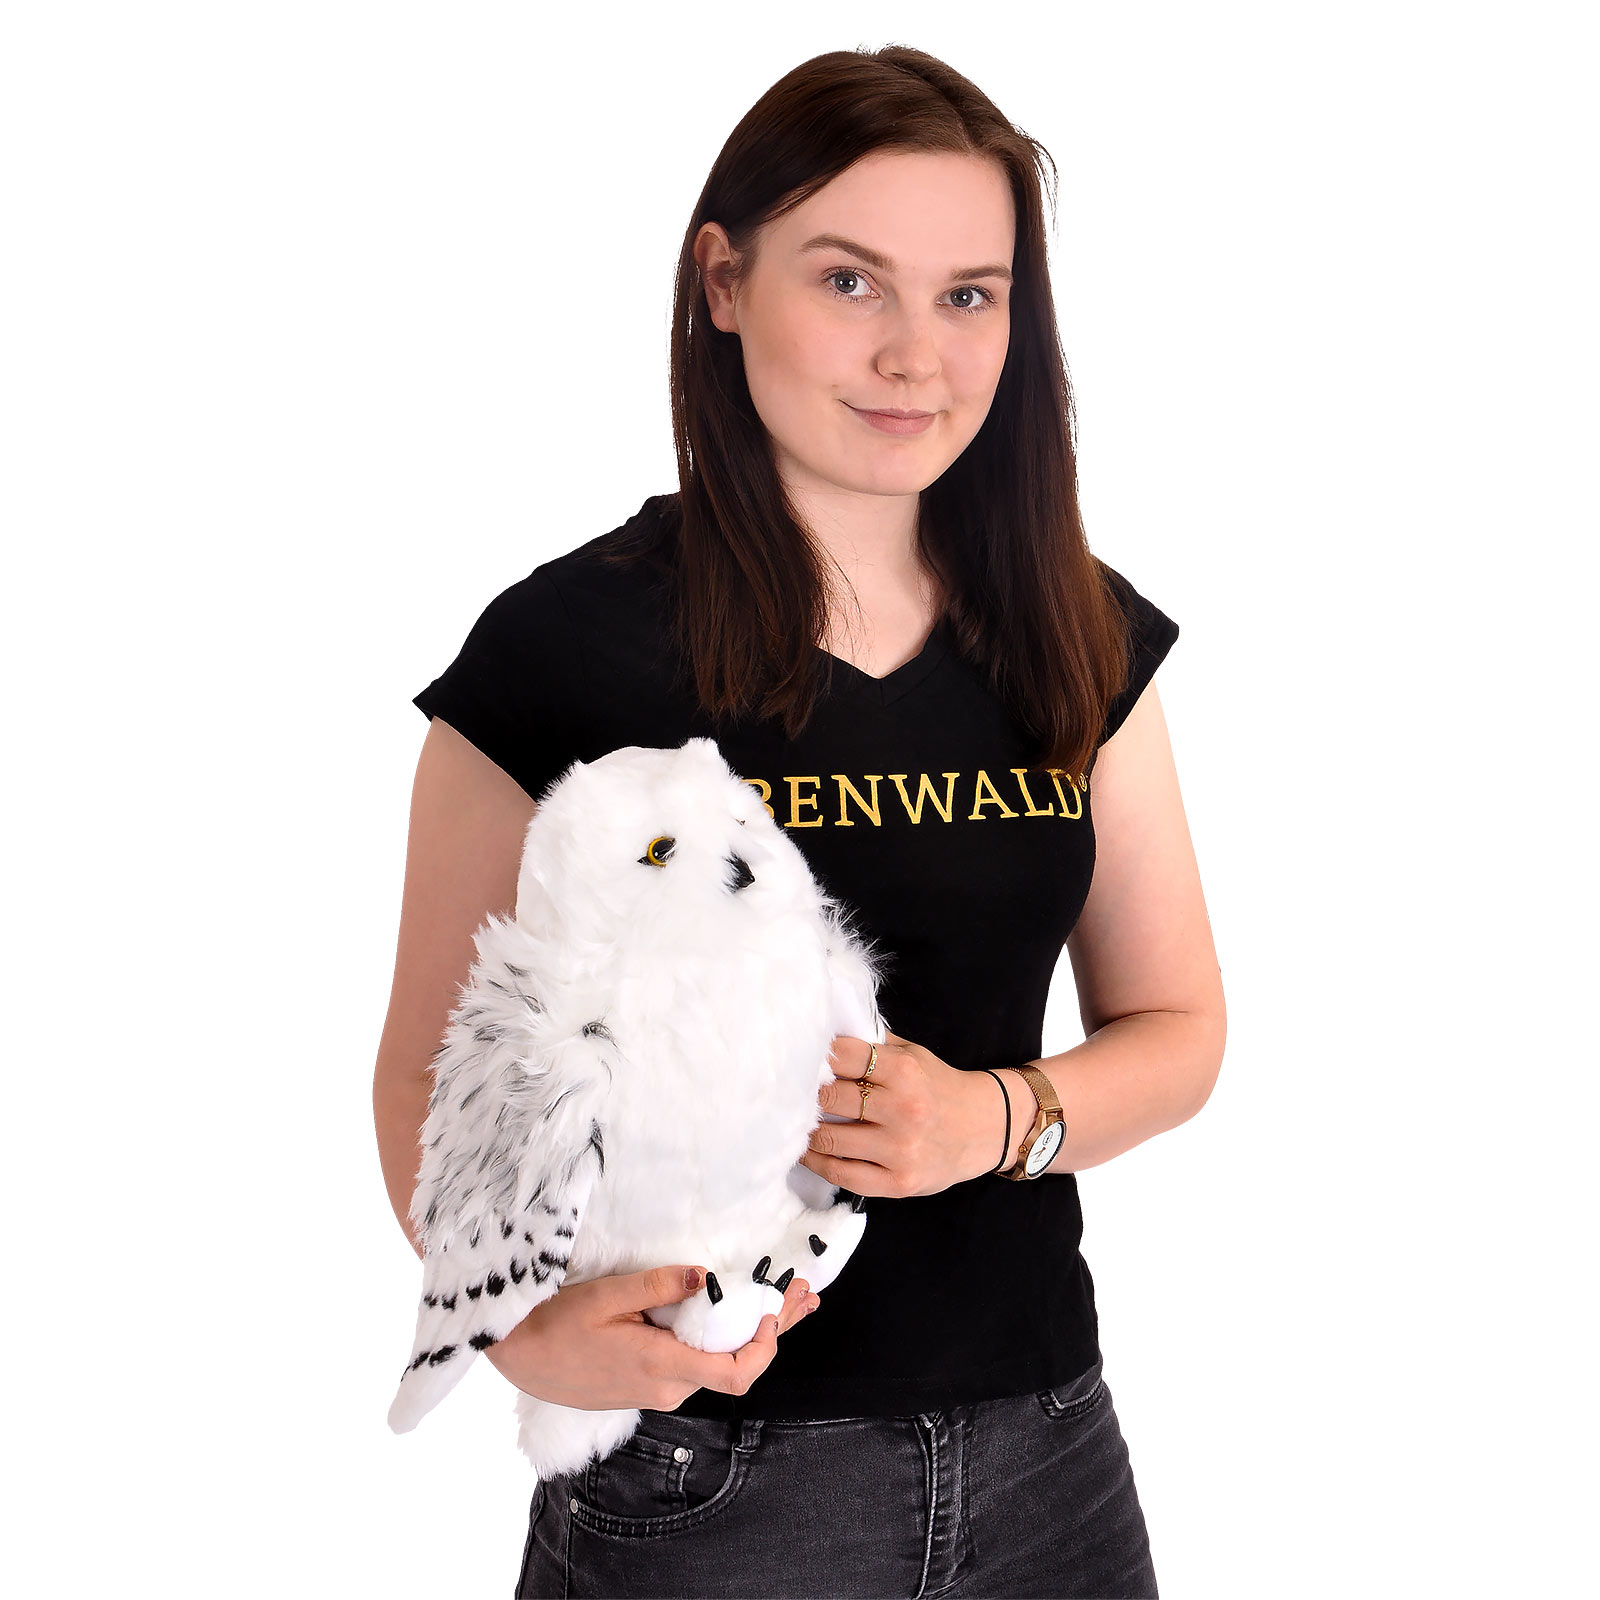 Harry Potter - Hedwig Plush Figure with movable wings